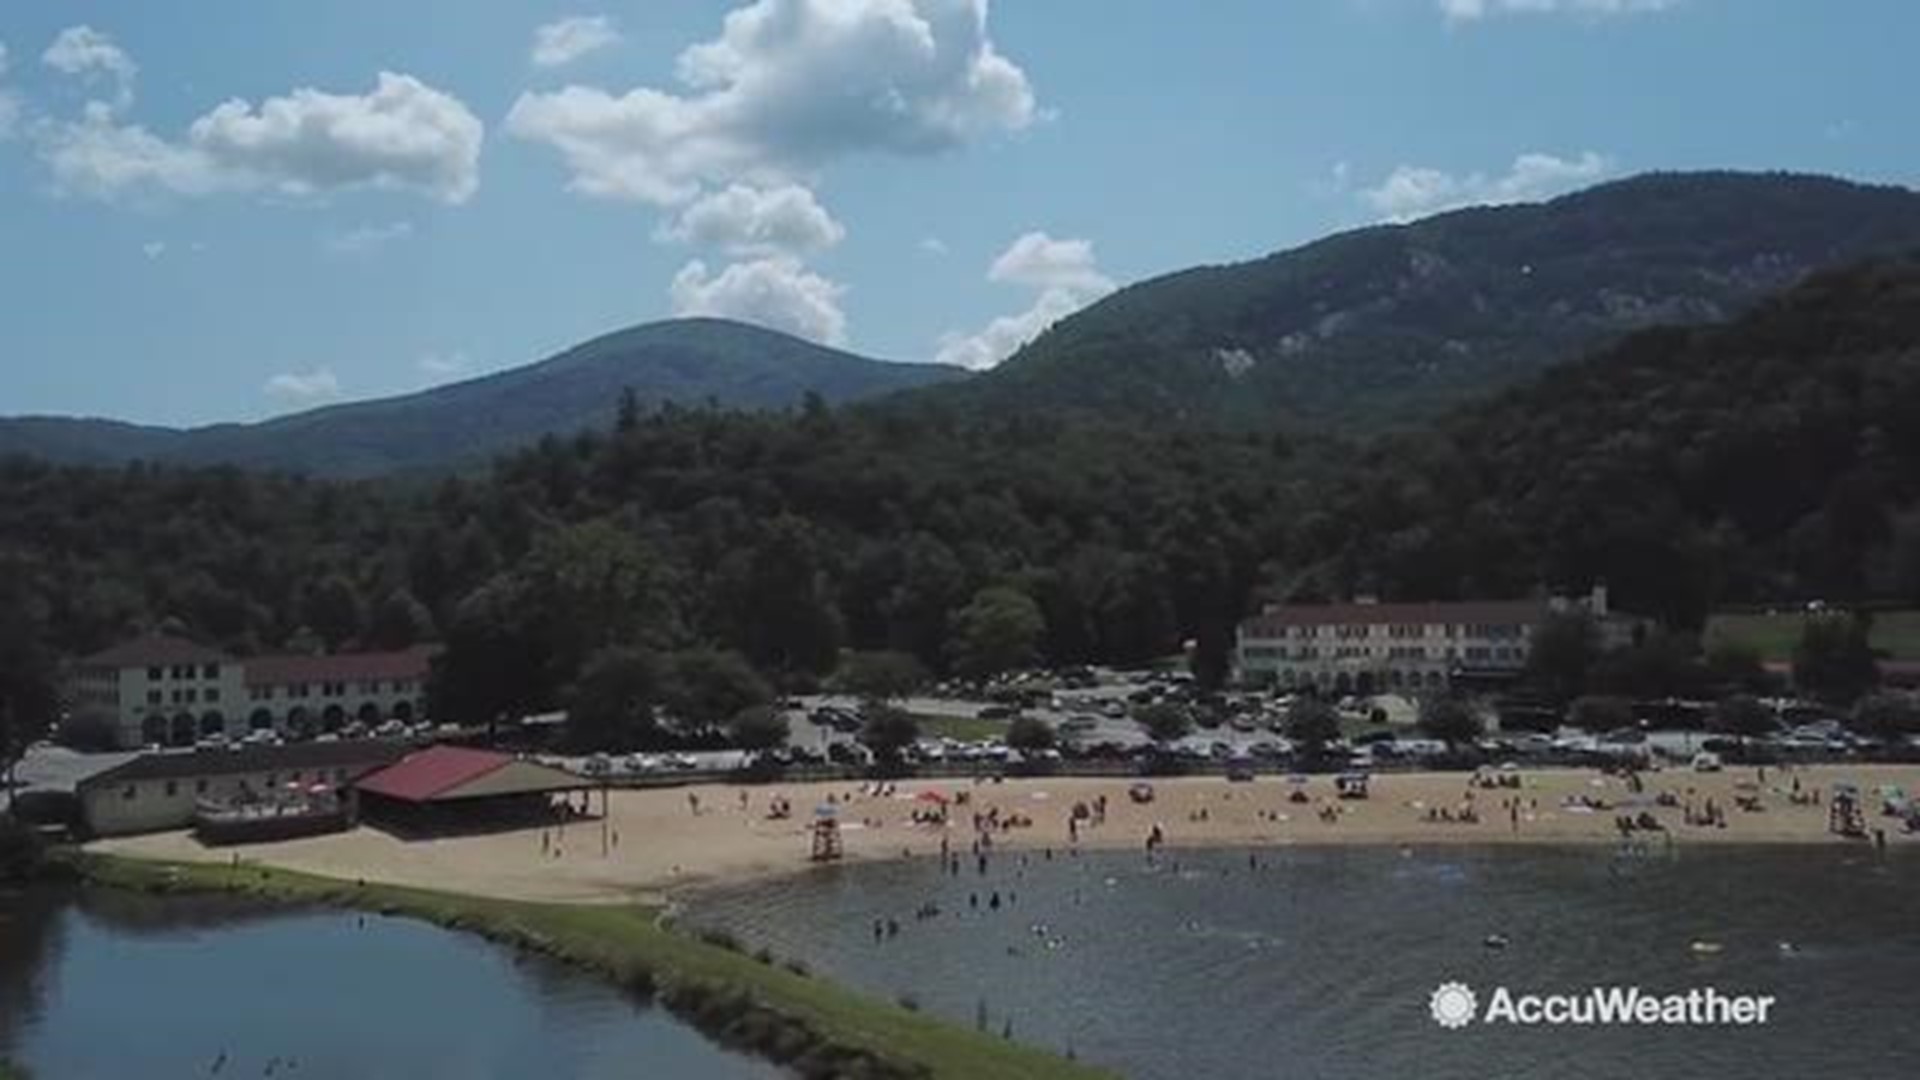 People are hitting the waters to cool off and enjoy our nation's birthday at Lake Lure, North Carolina.